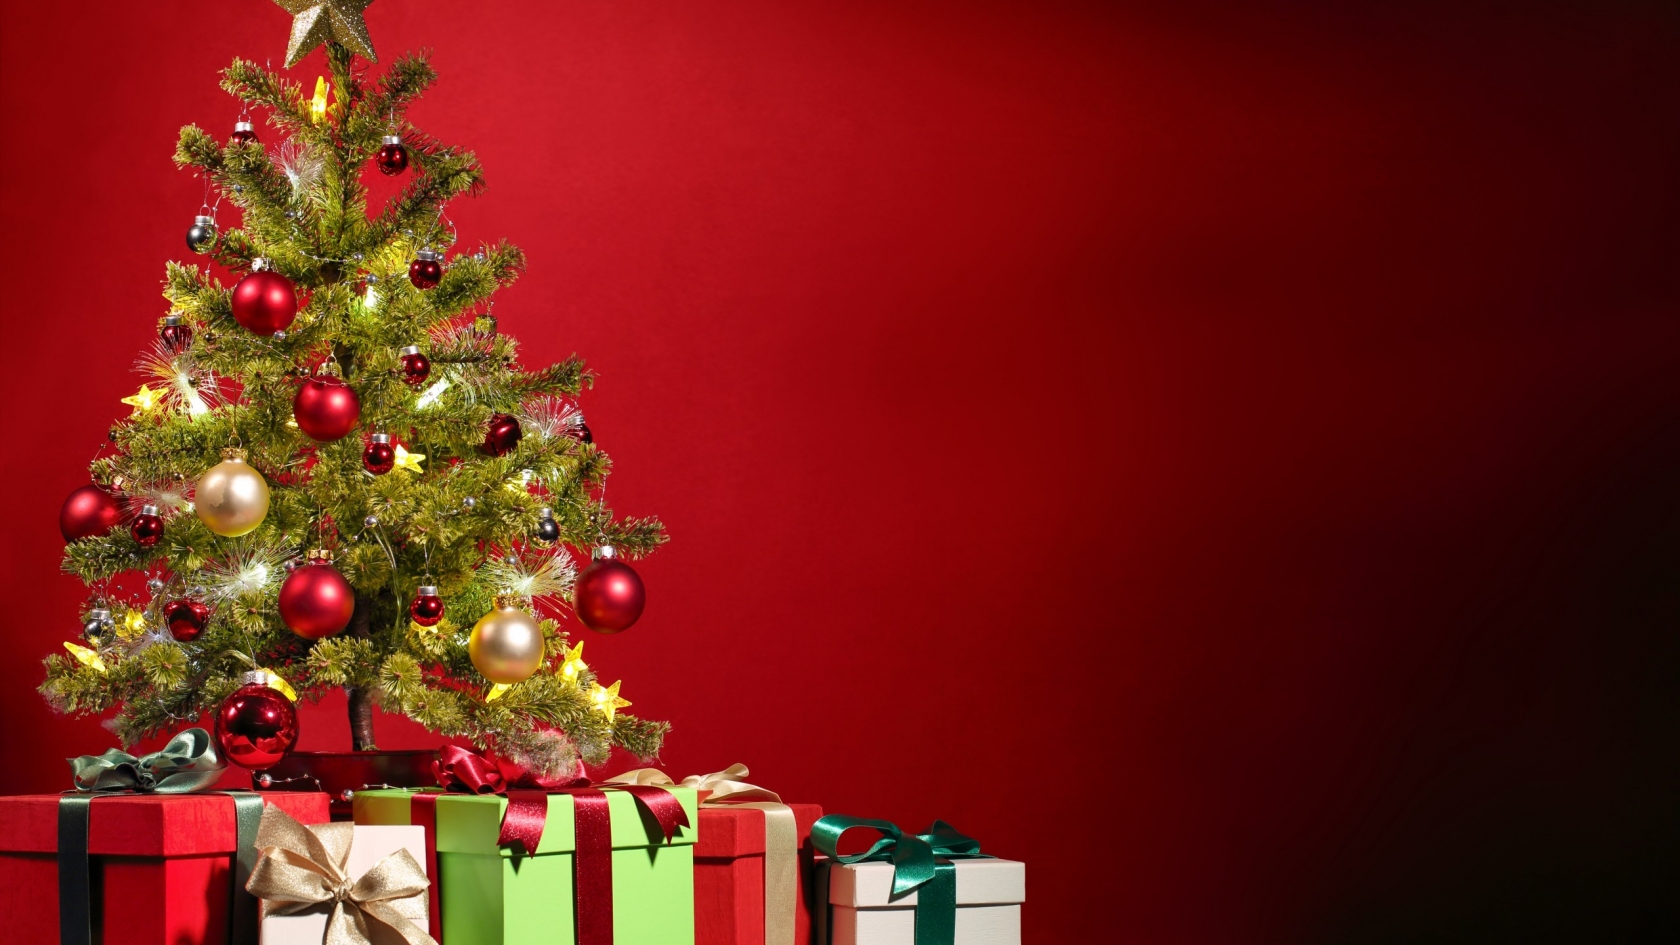 Special Christmas Tree and Gifts for 1680 x 945 HDTV resolution